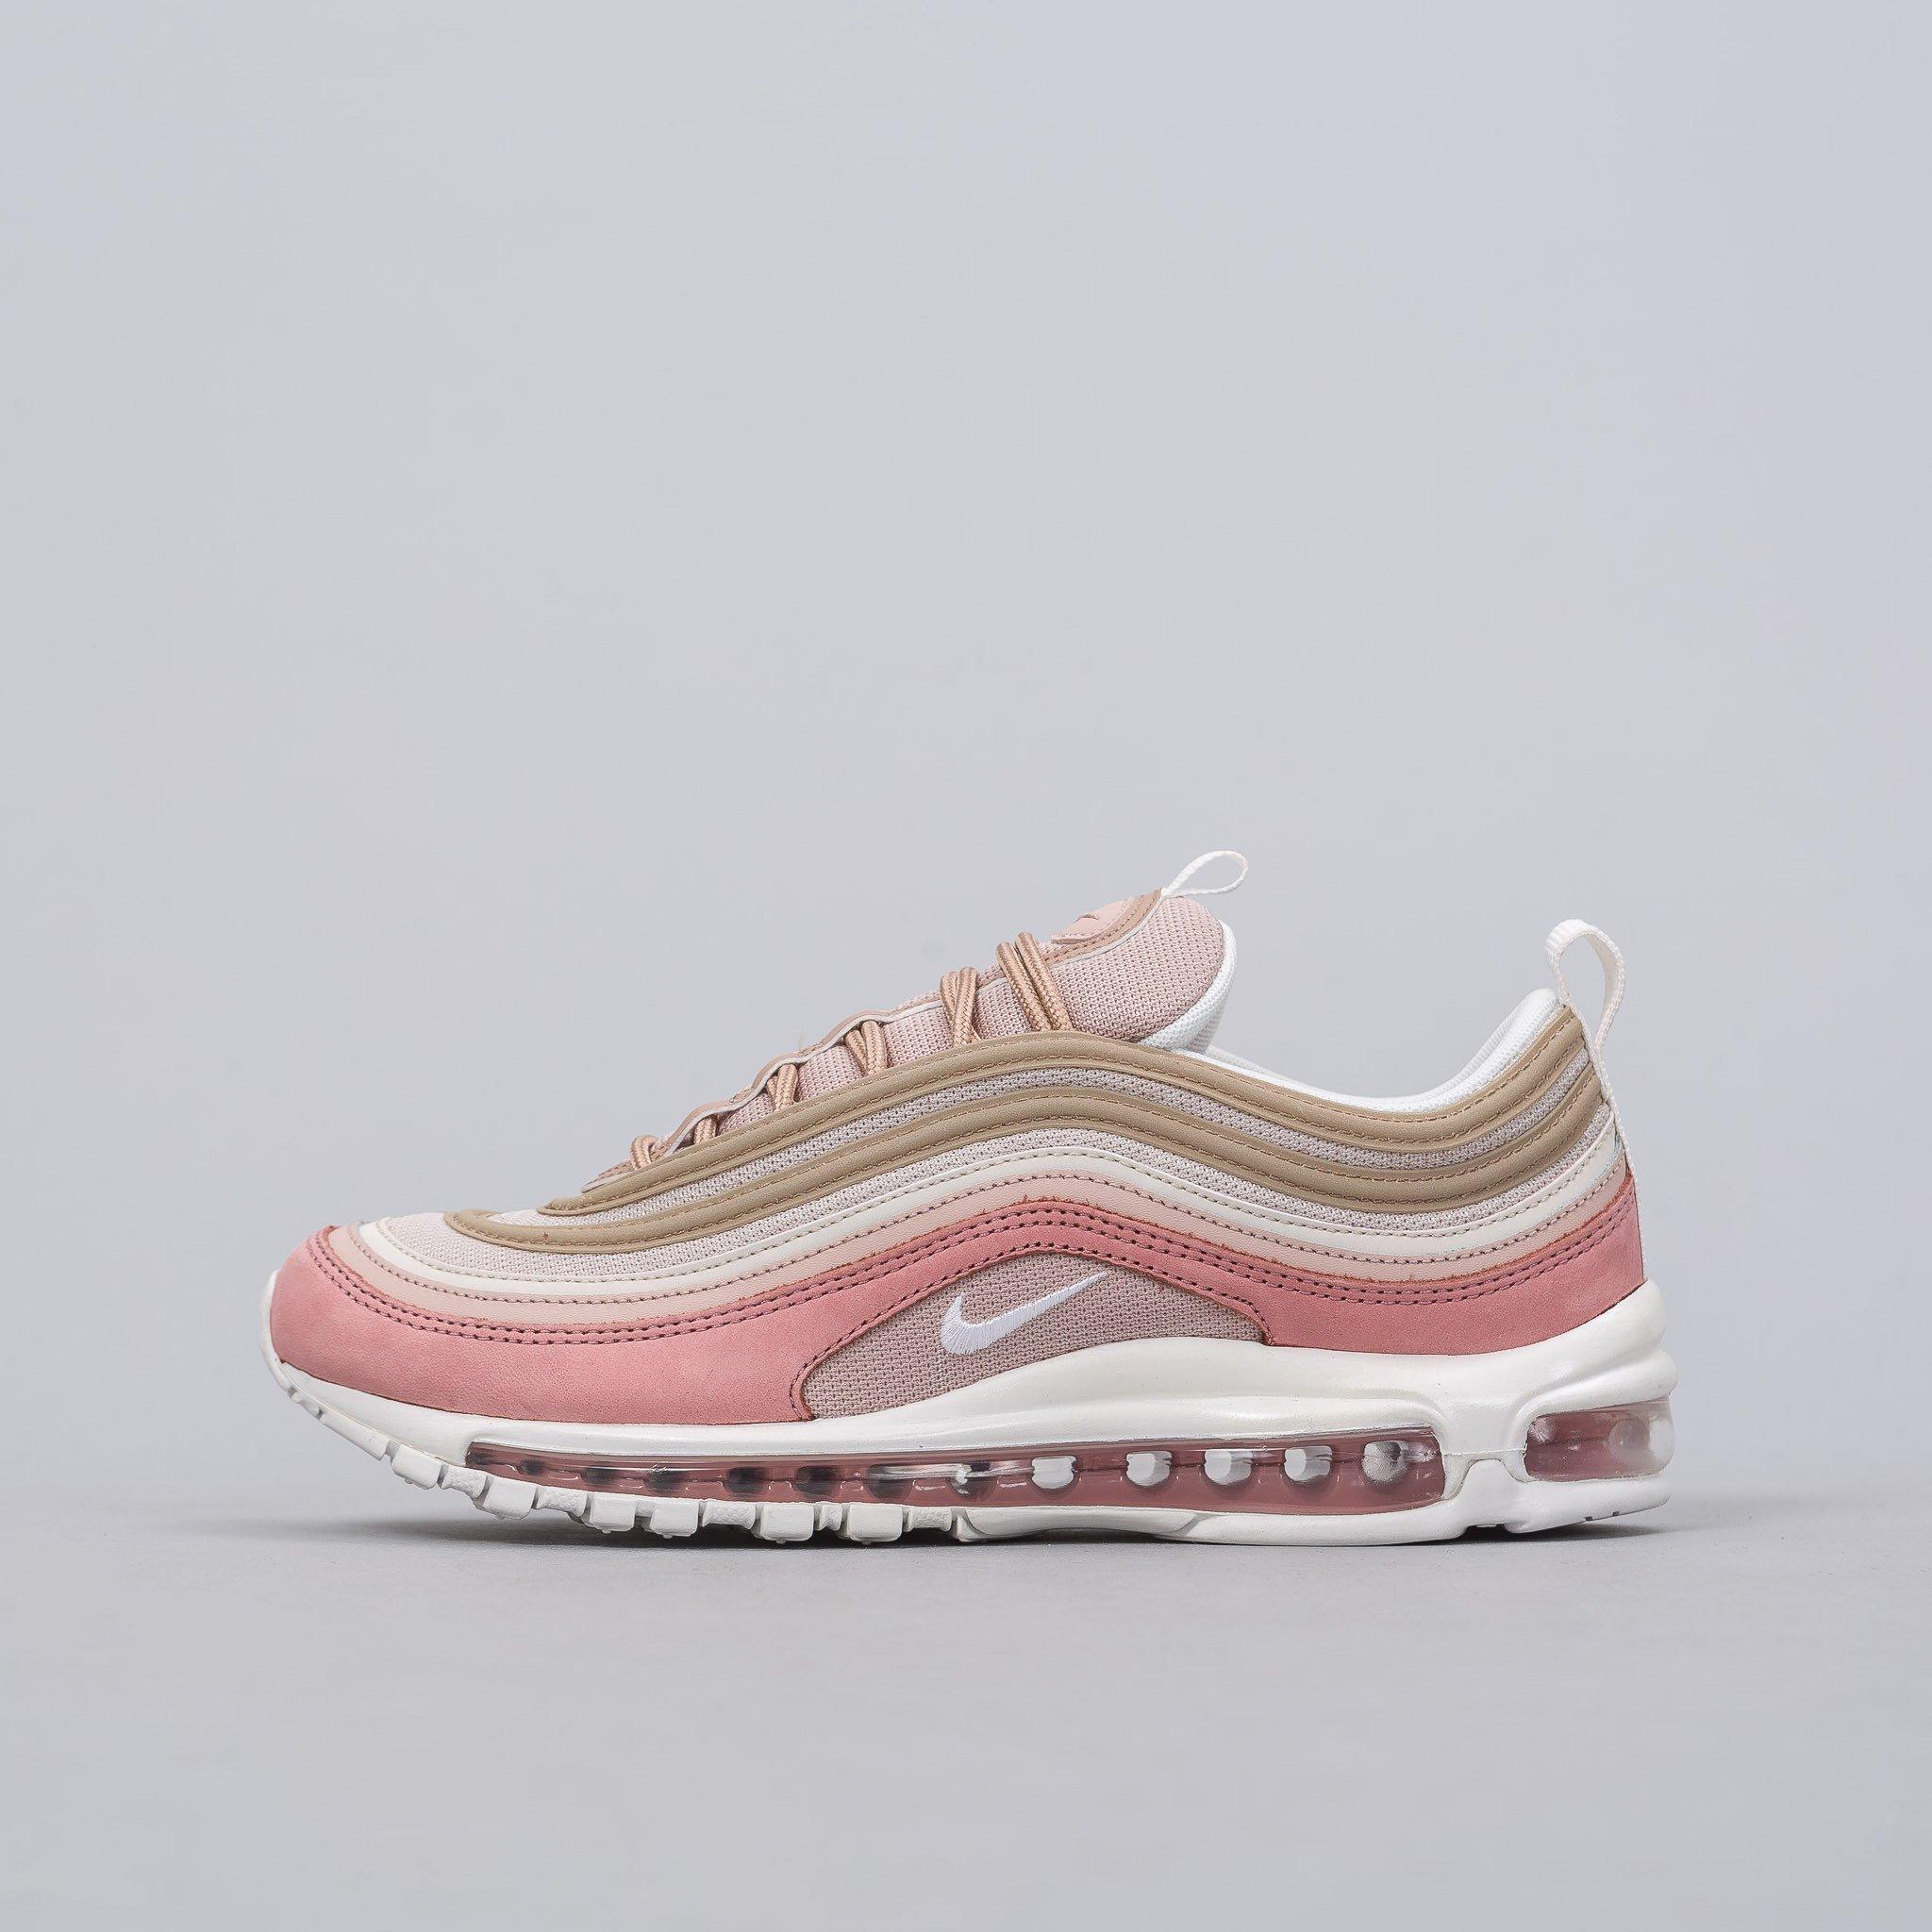 Nike Rubber Air Max 97 Premium In Particle Beige/summit White/rush Pink for  Men - Lyst